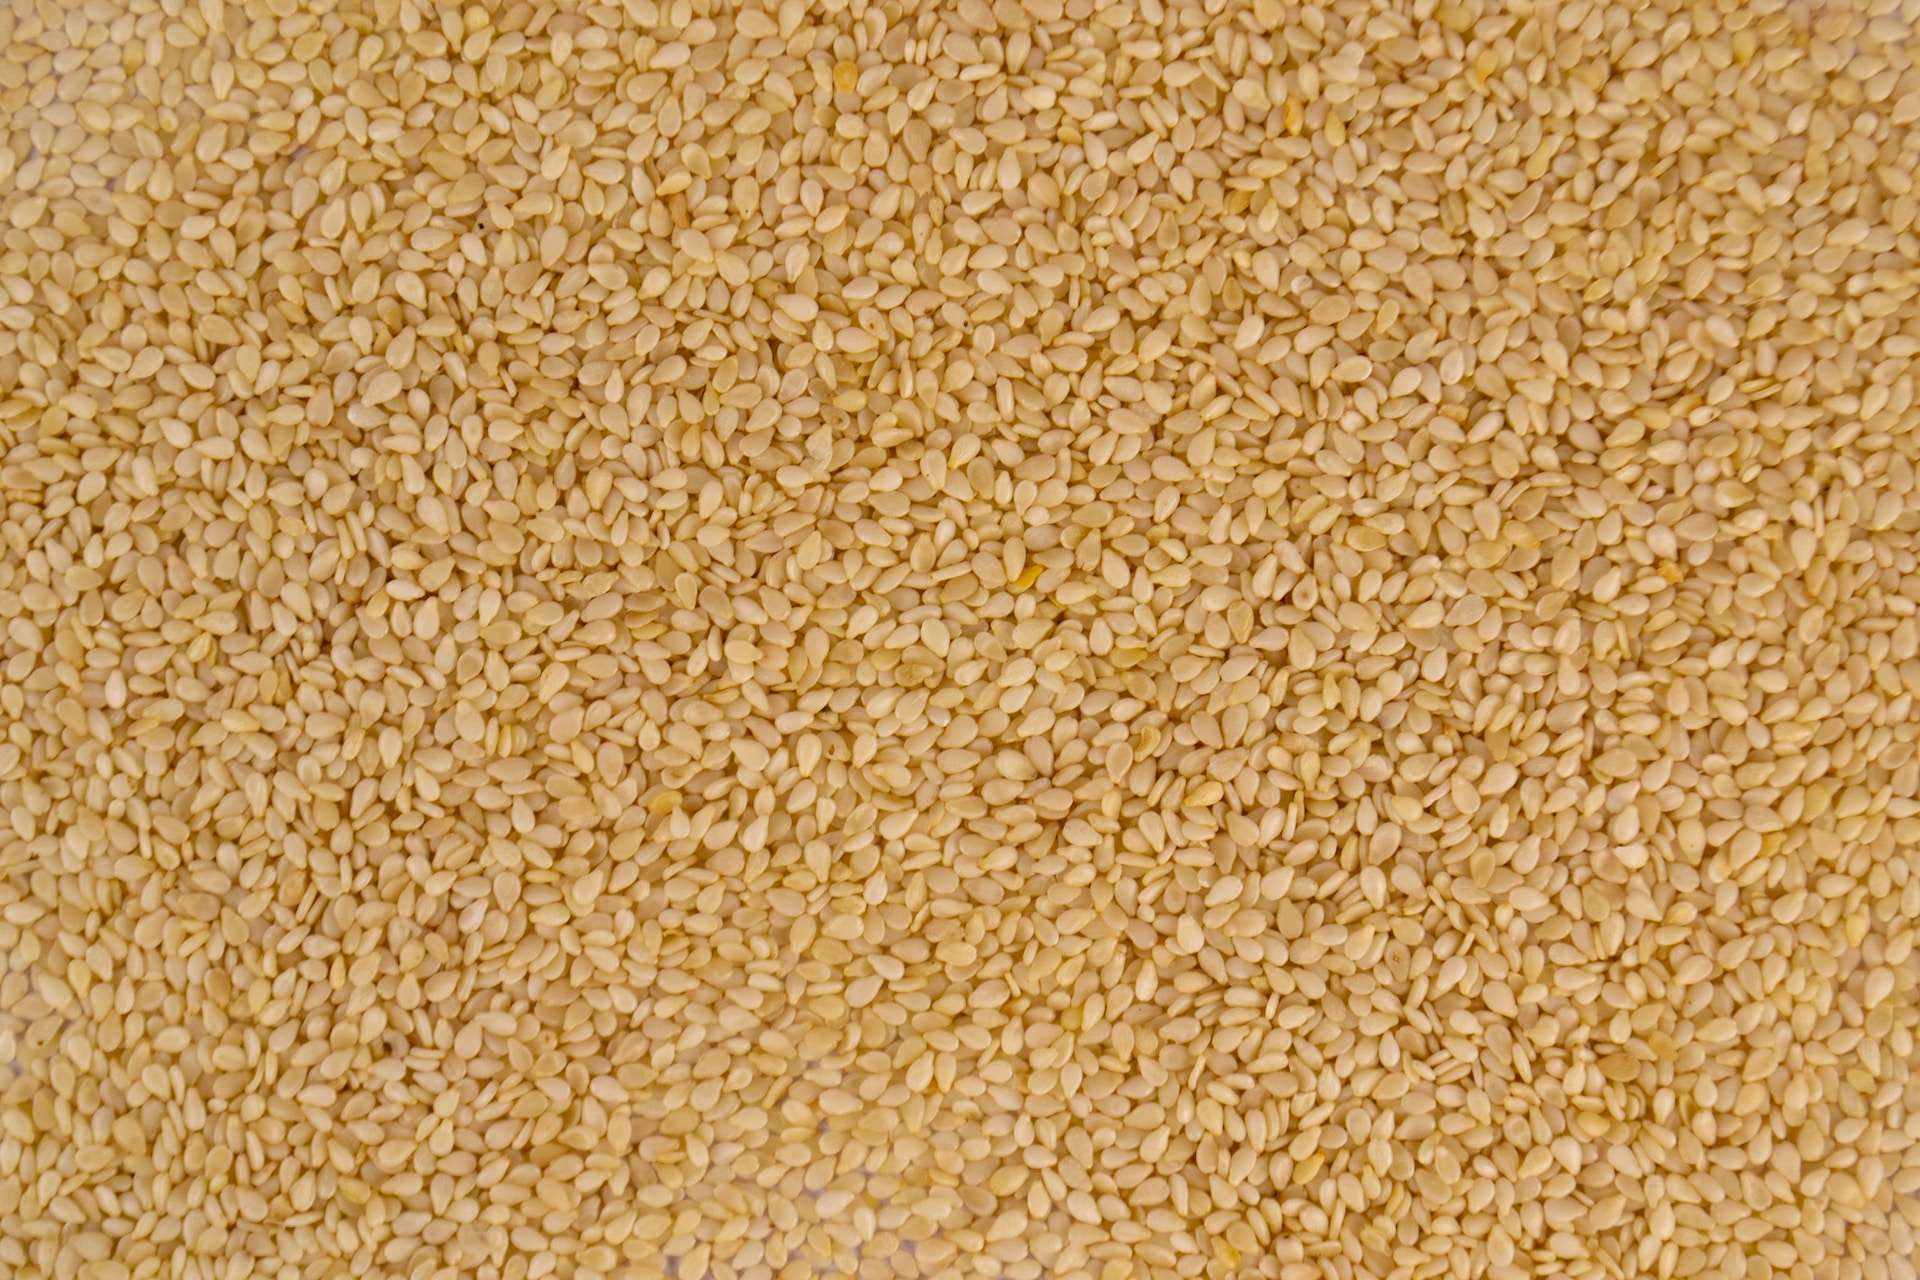 19-facts-about-sesame-seeds